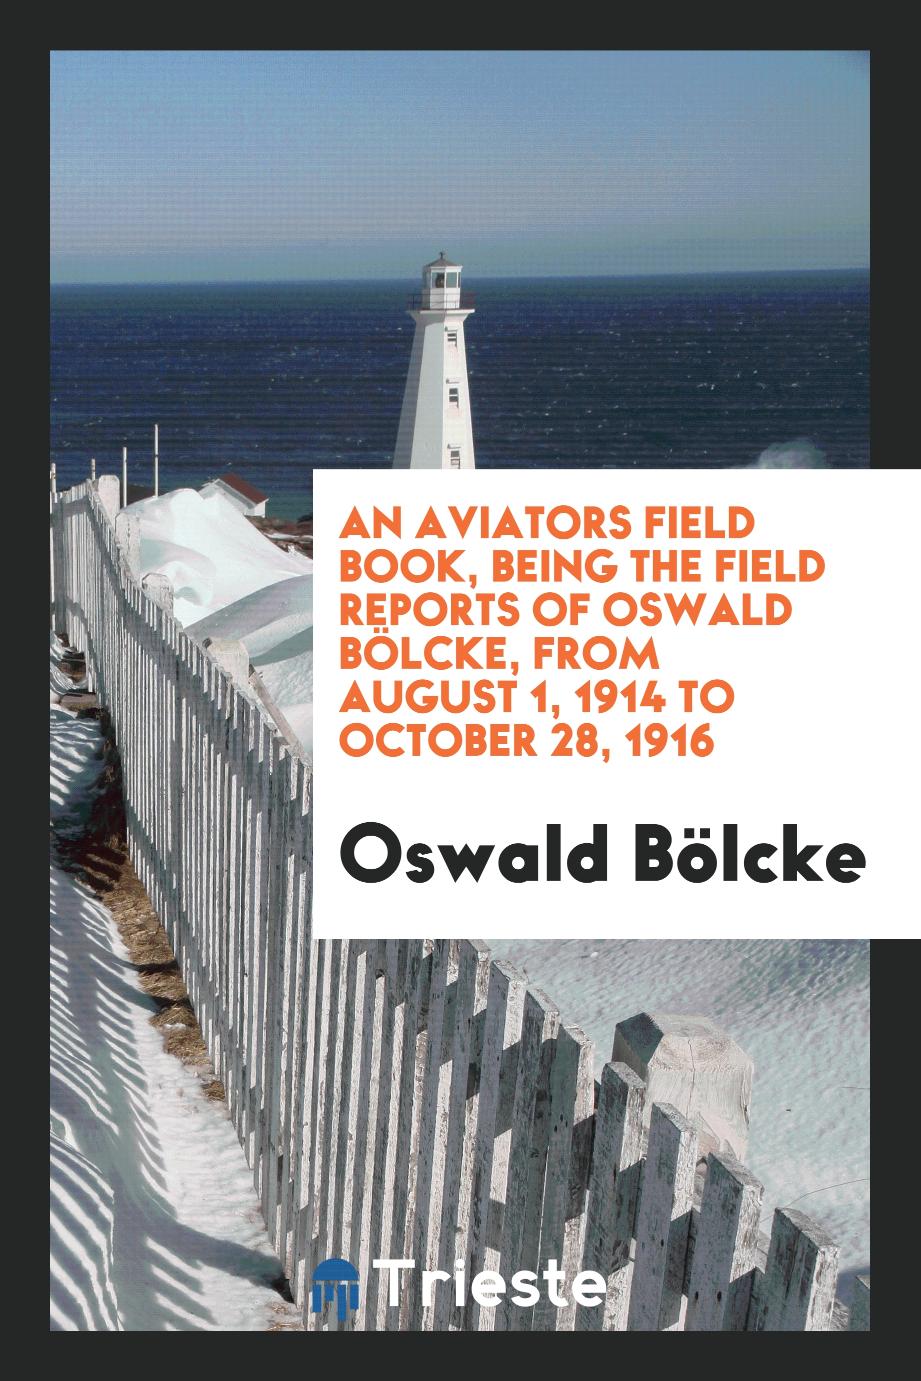 An aviators field book, being the field reports of Oswald Bölcke, from August 1, 1914 to October 28, 1916